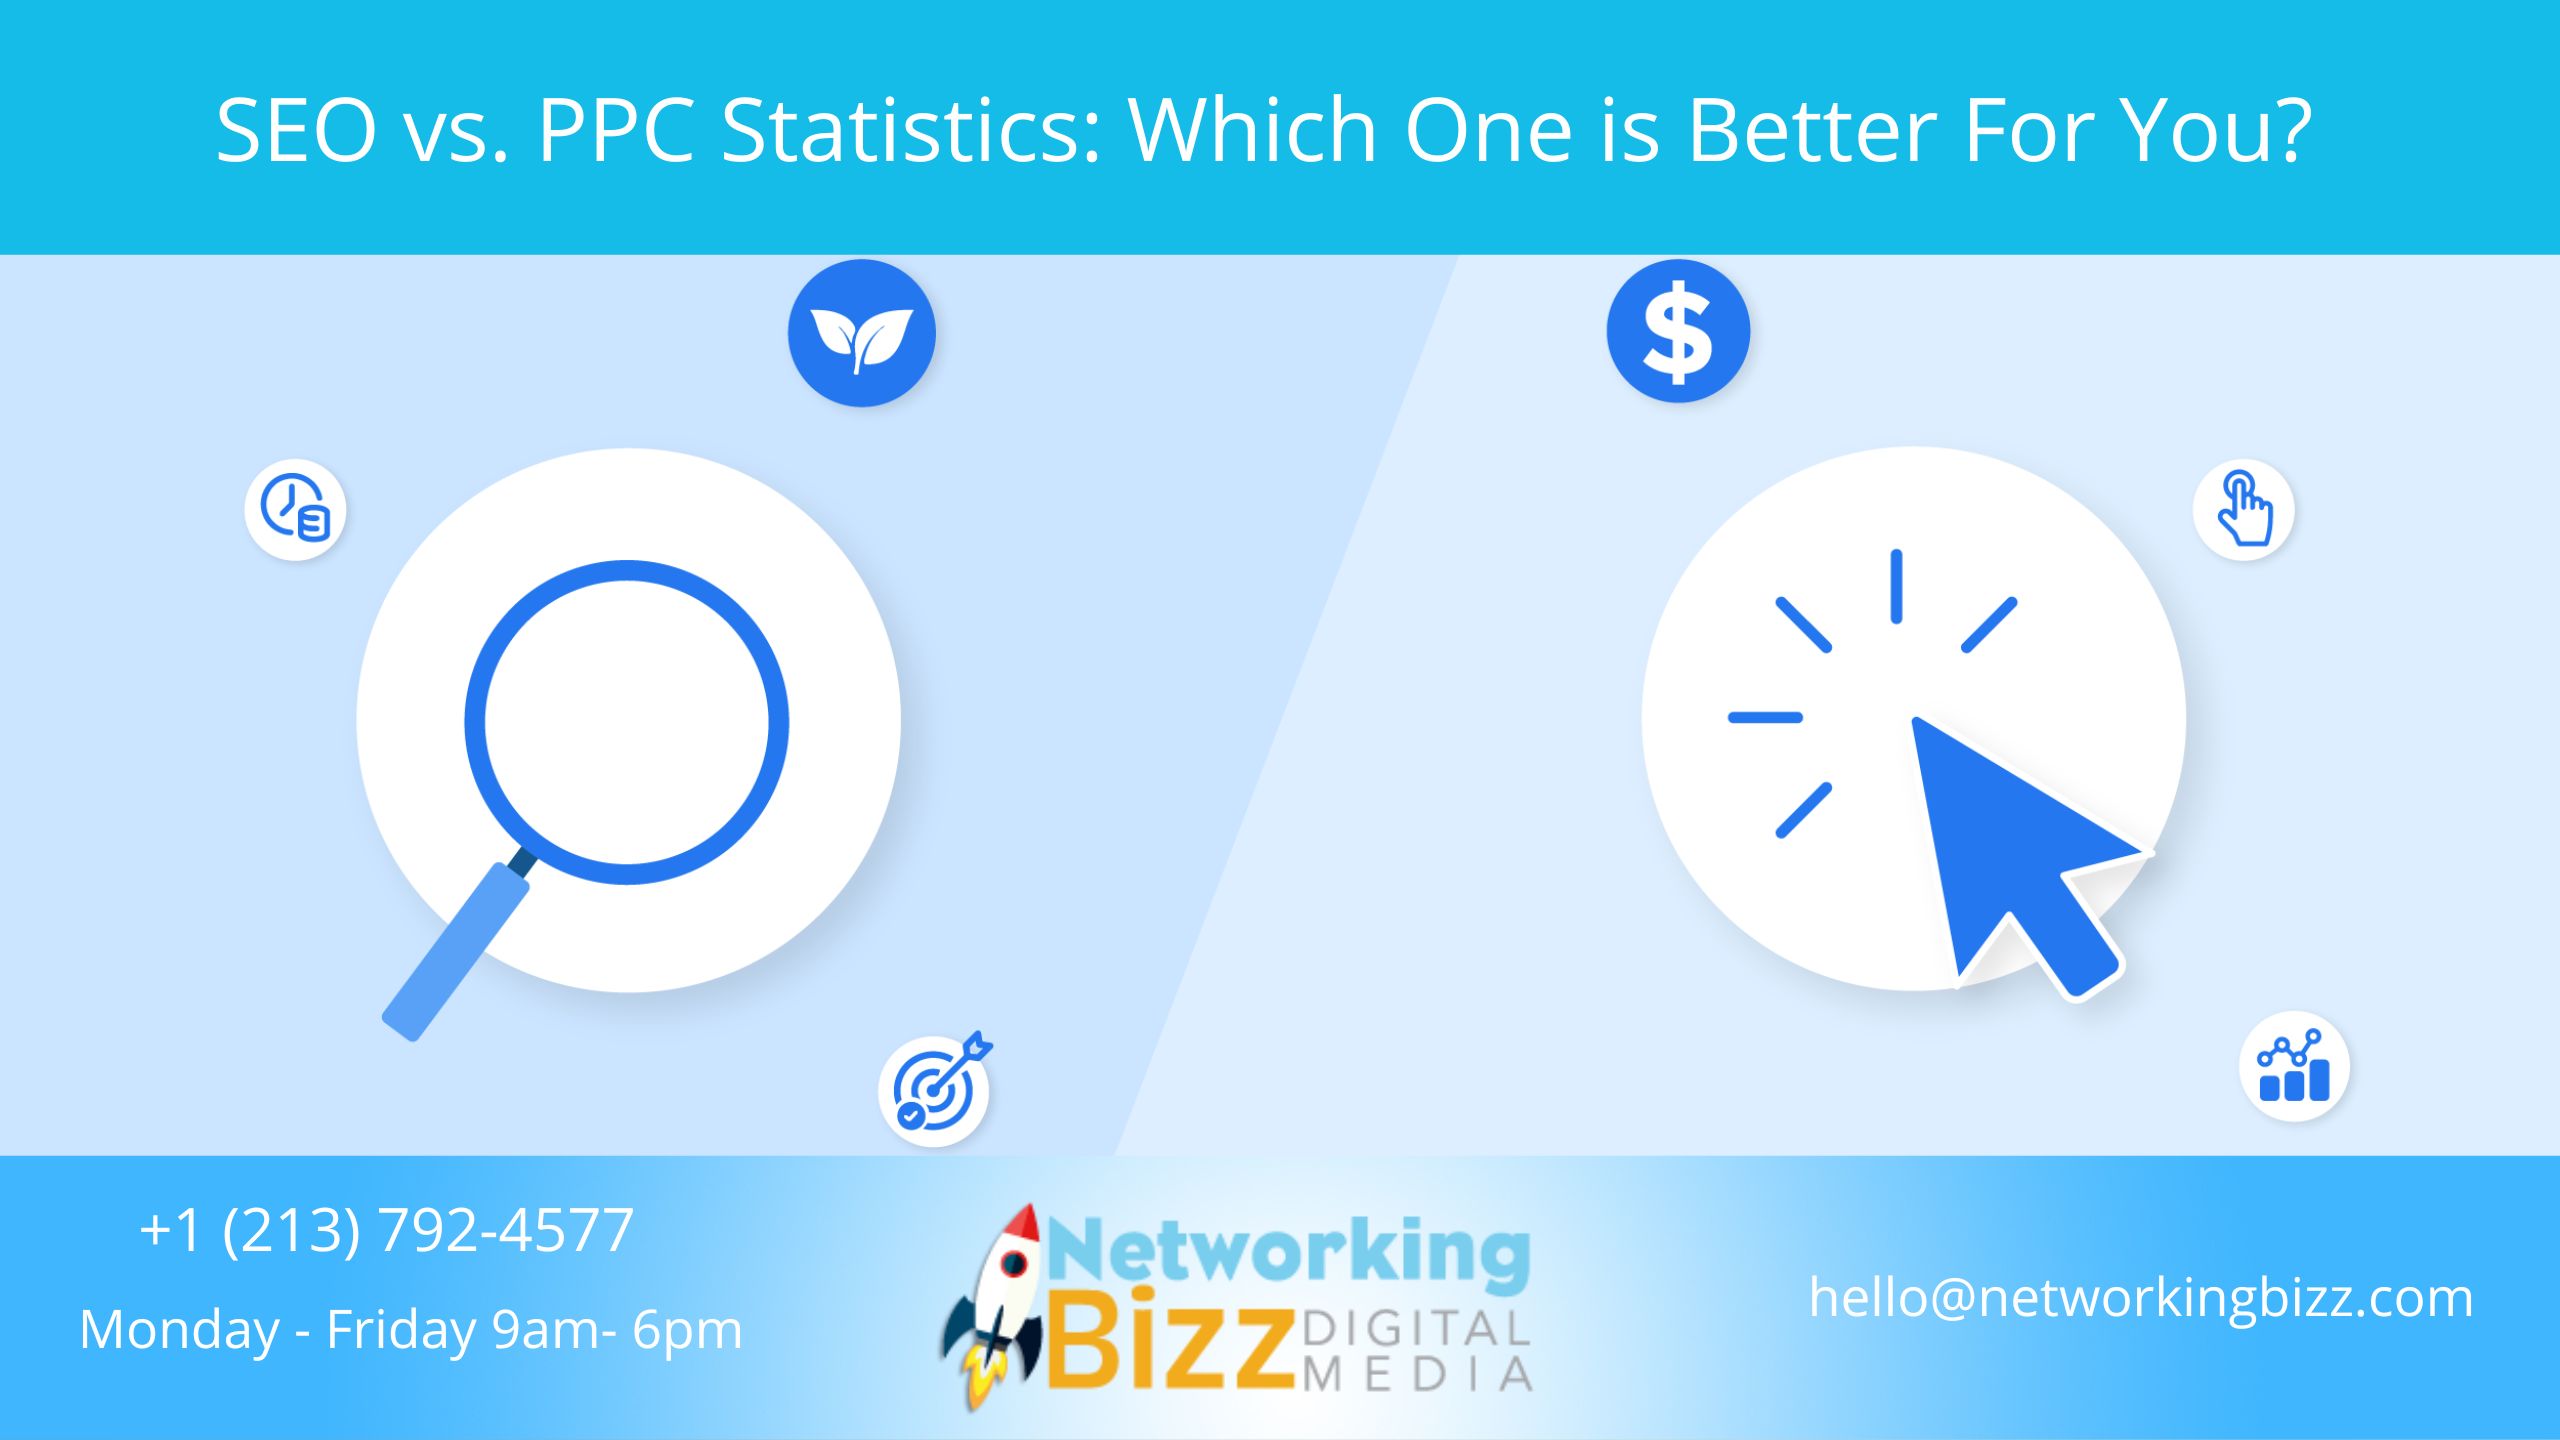 SEO vs. PPC Statistics: Which One is Better For You?